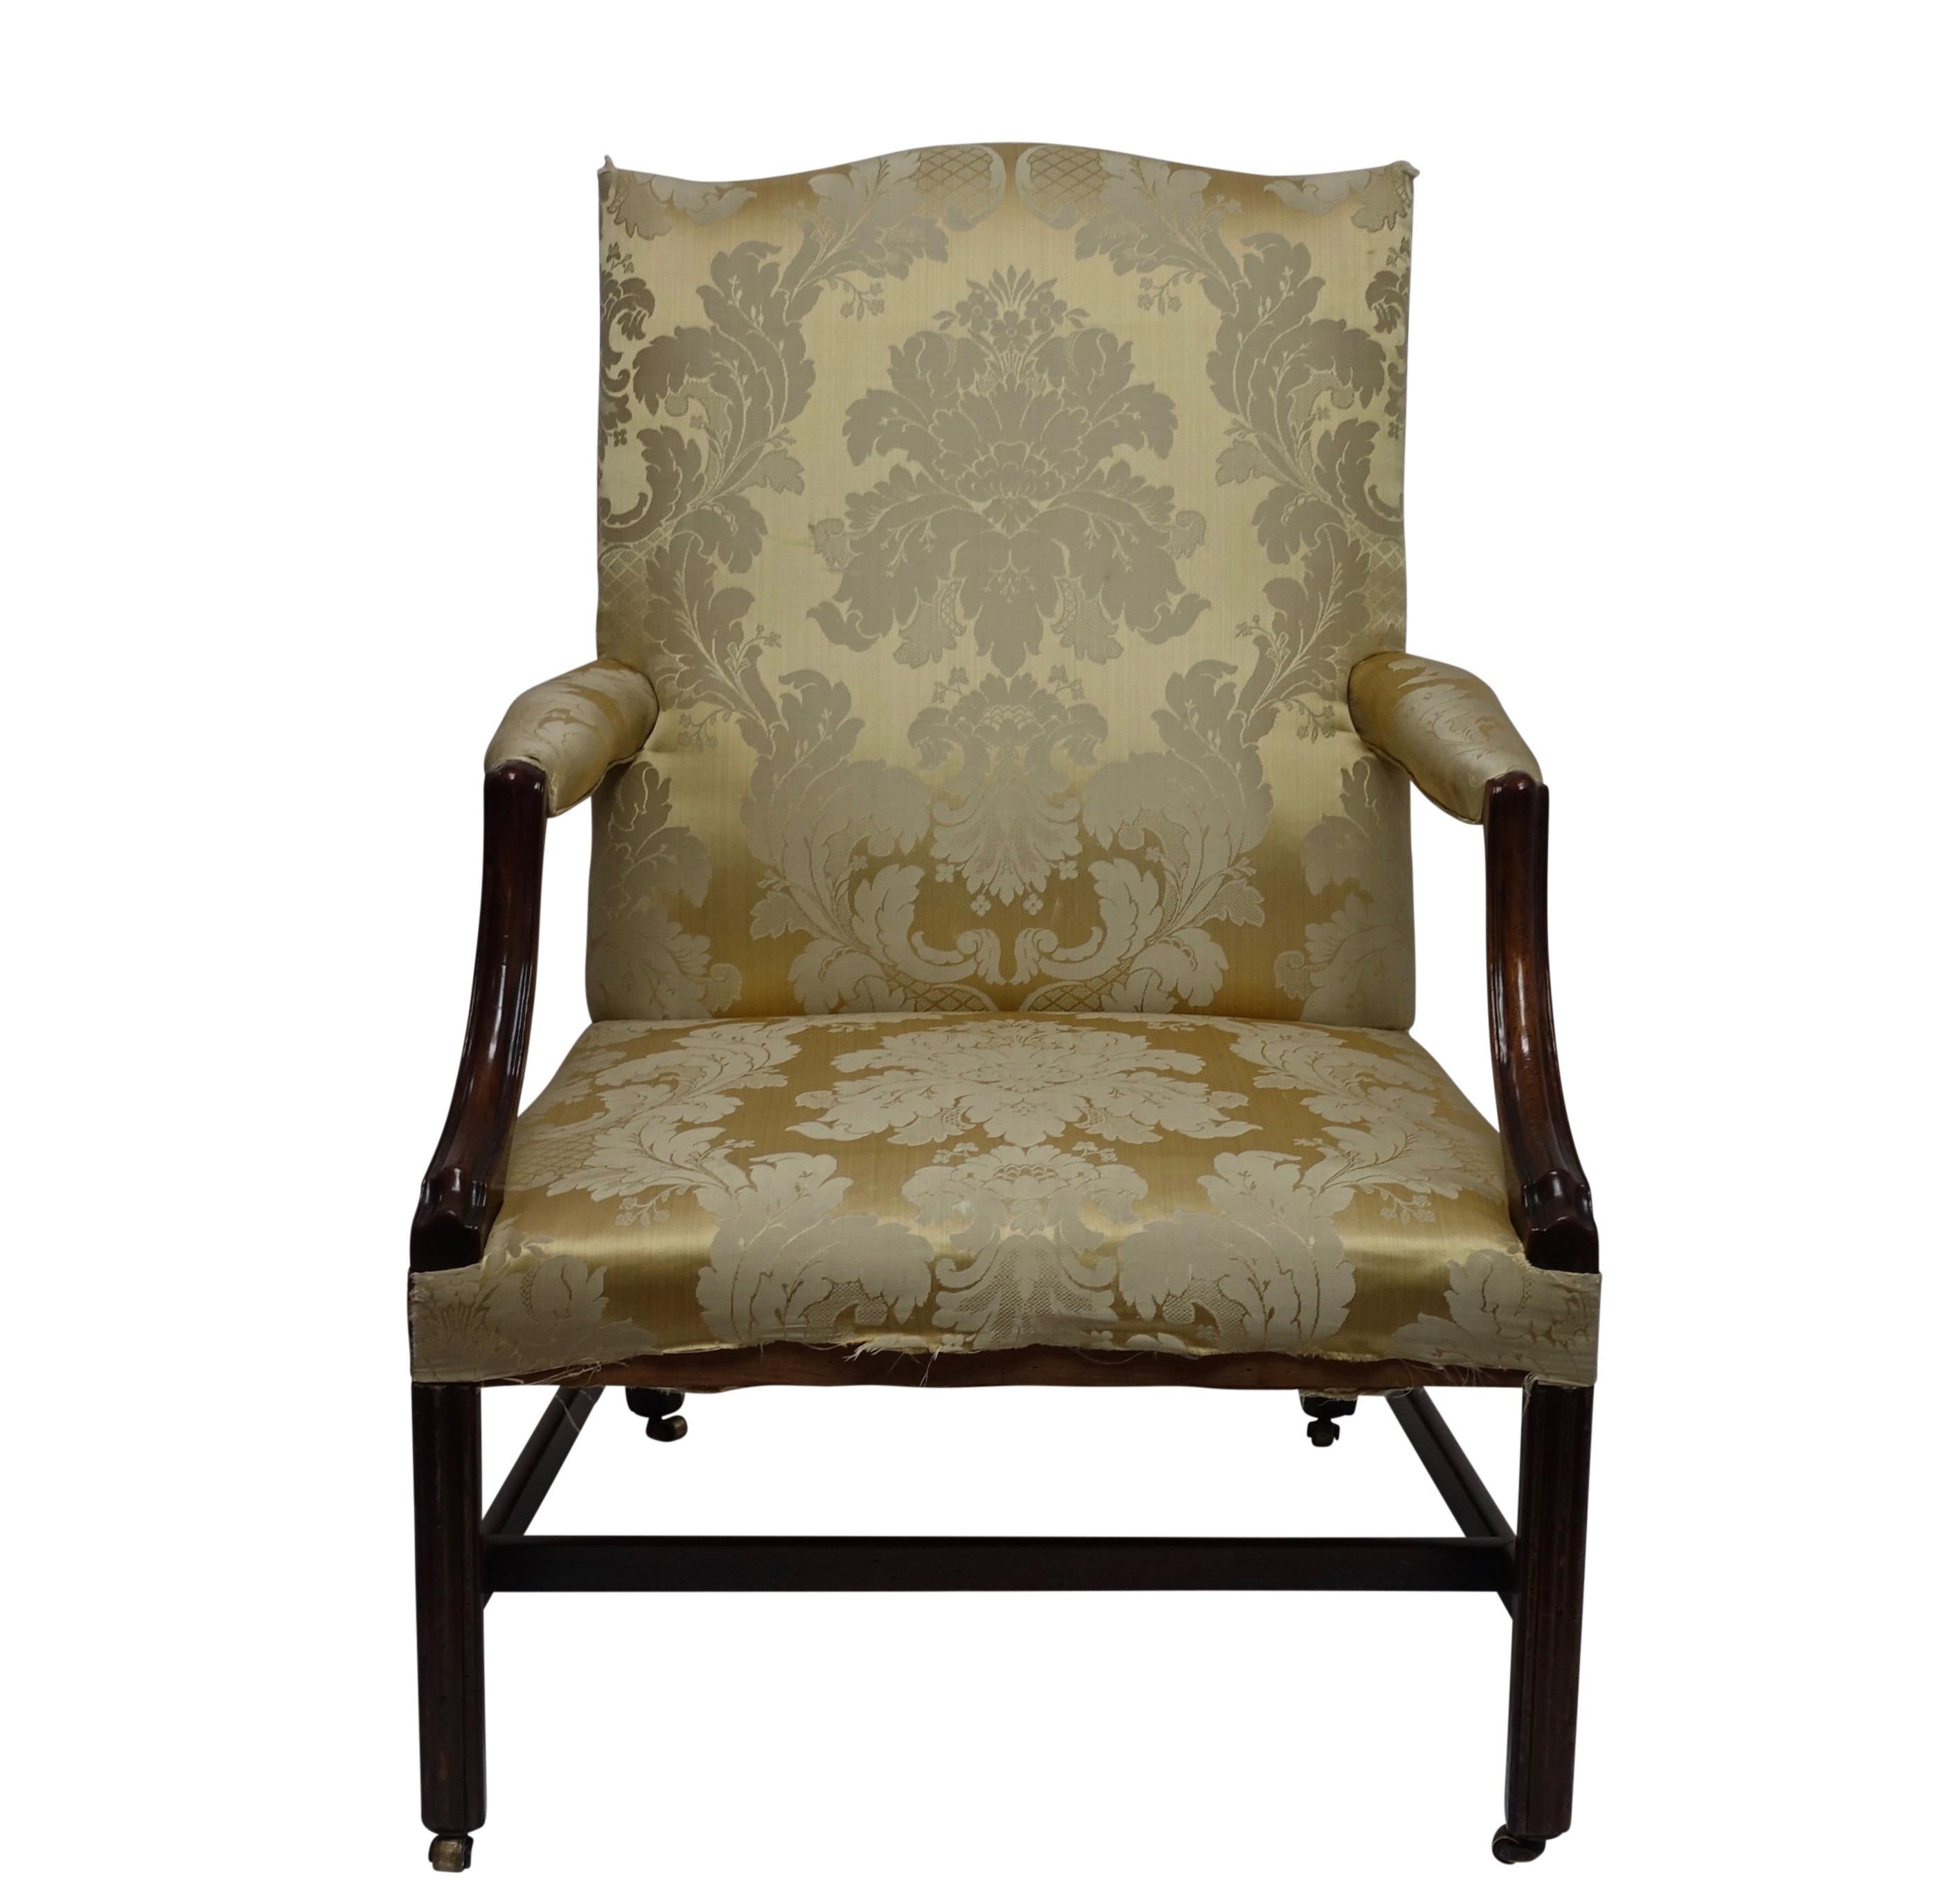 George III style Gainsborough mahogany library armchair. Having typical of the period generous proportions with carved arms, chamfered legs and original brass casters. English, Circa 1760.